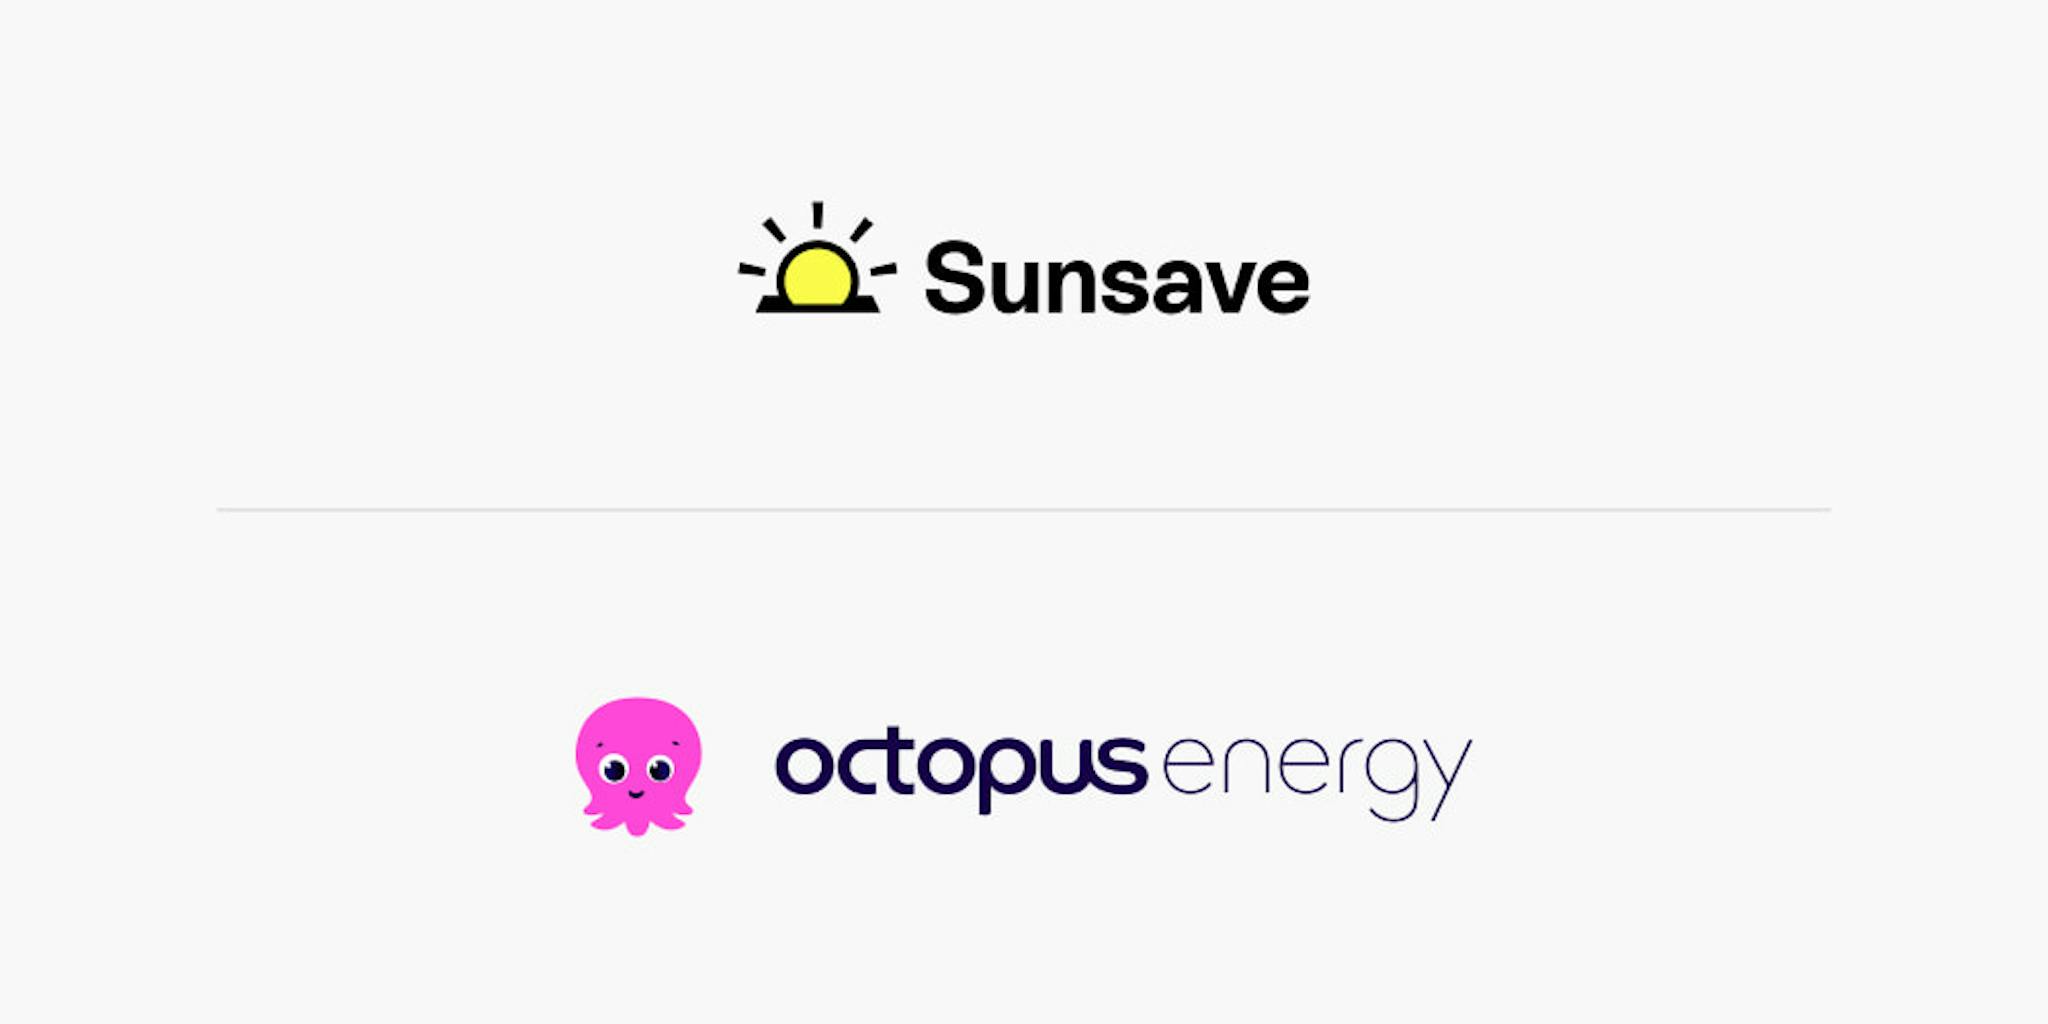 Sunsave logo on top of the Octopus Energy logo